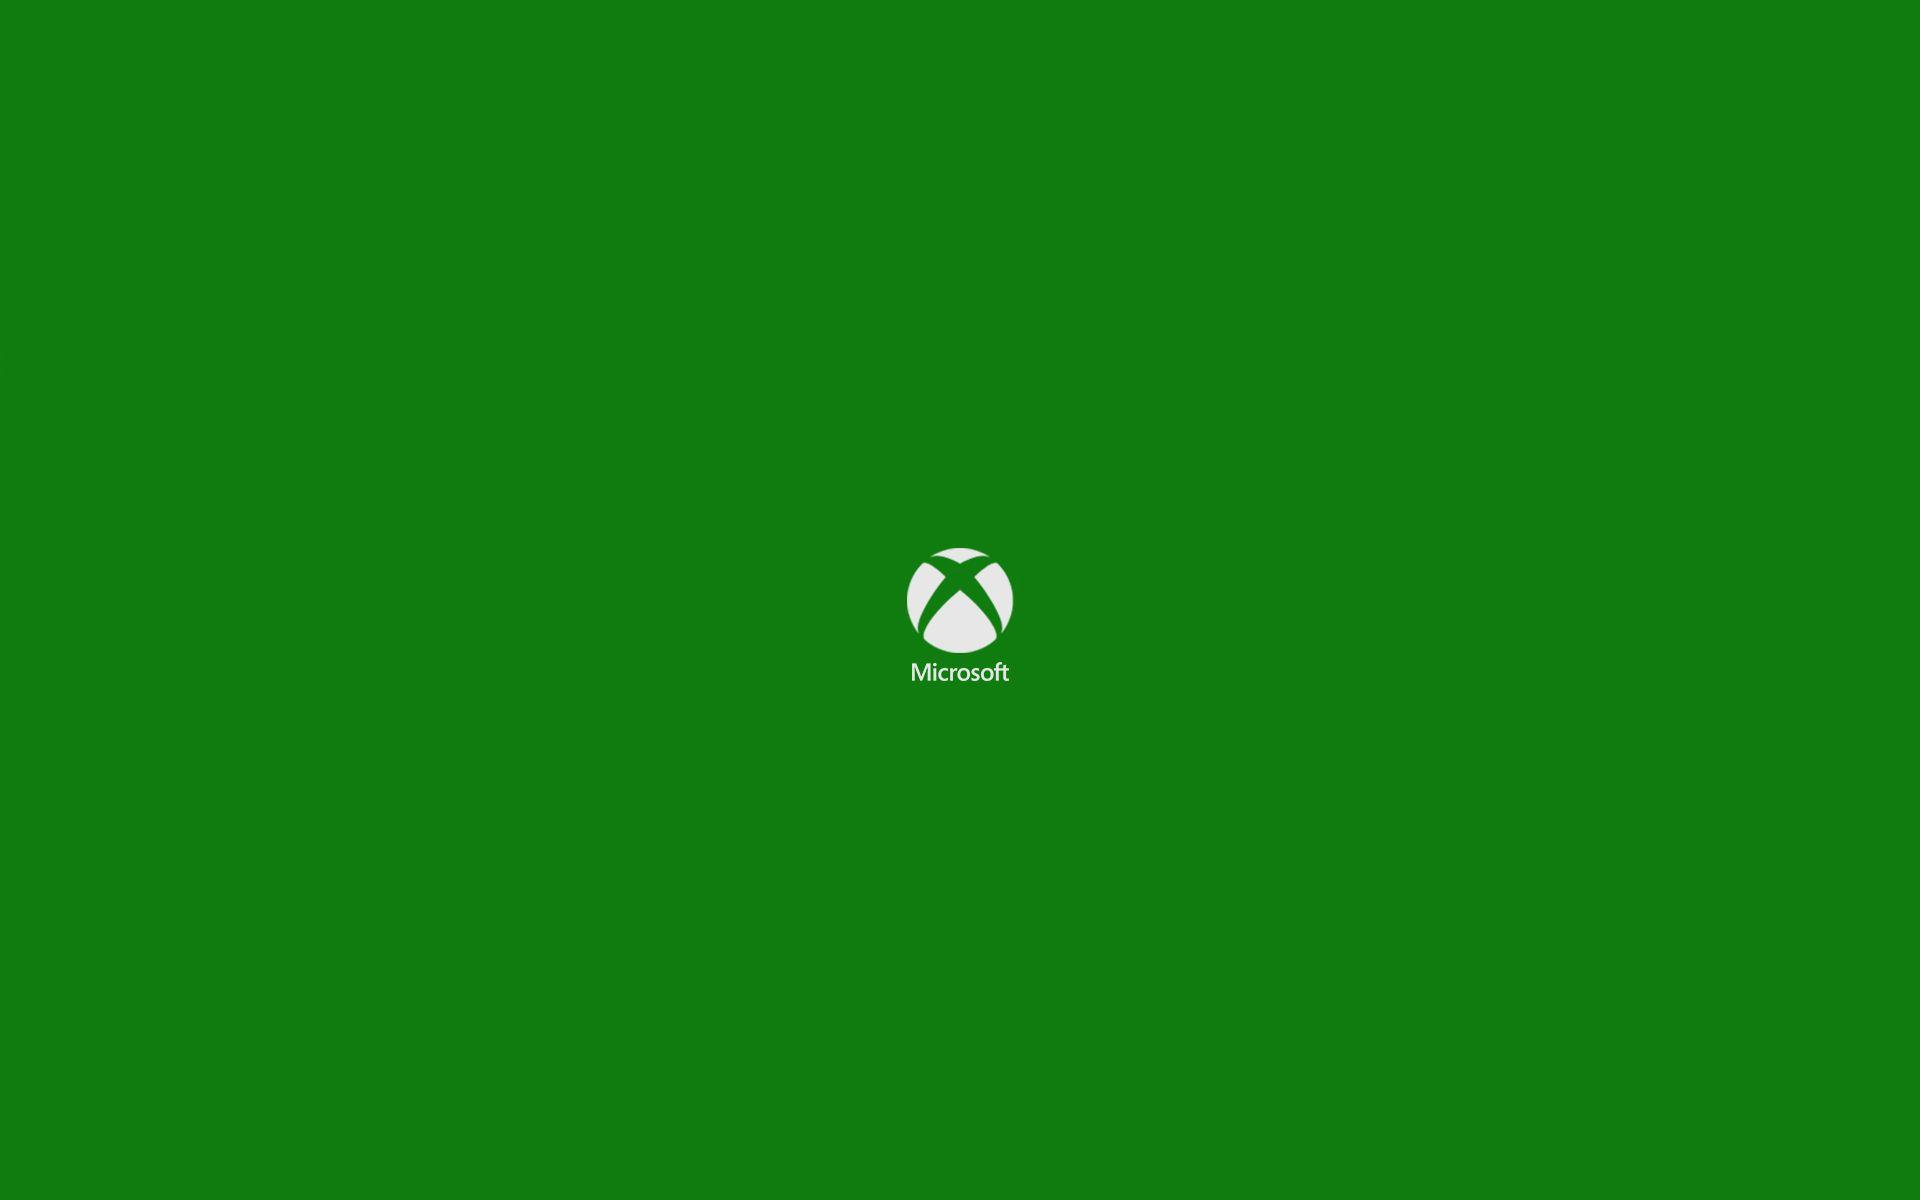 Xbox One Logo Vecto HD Wallpaper, Background Image